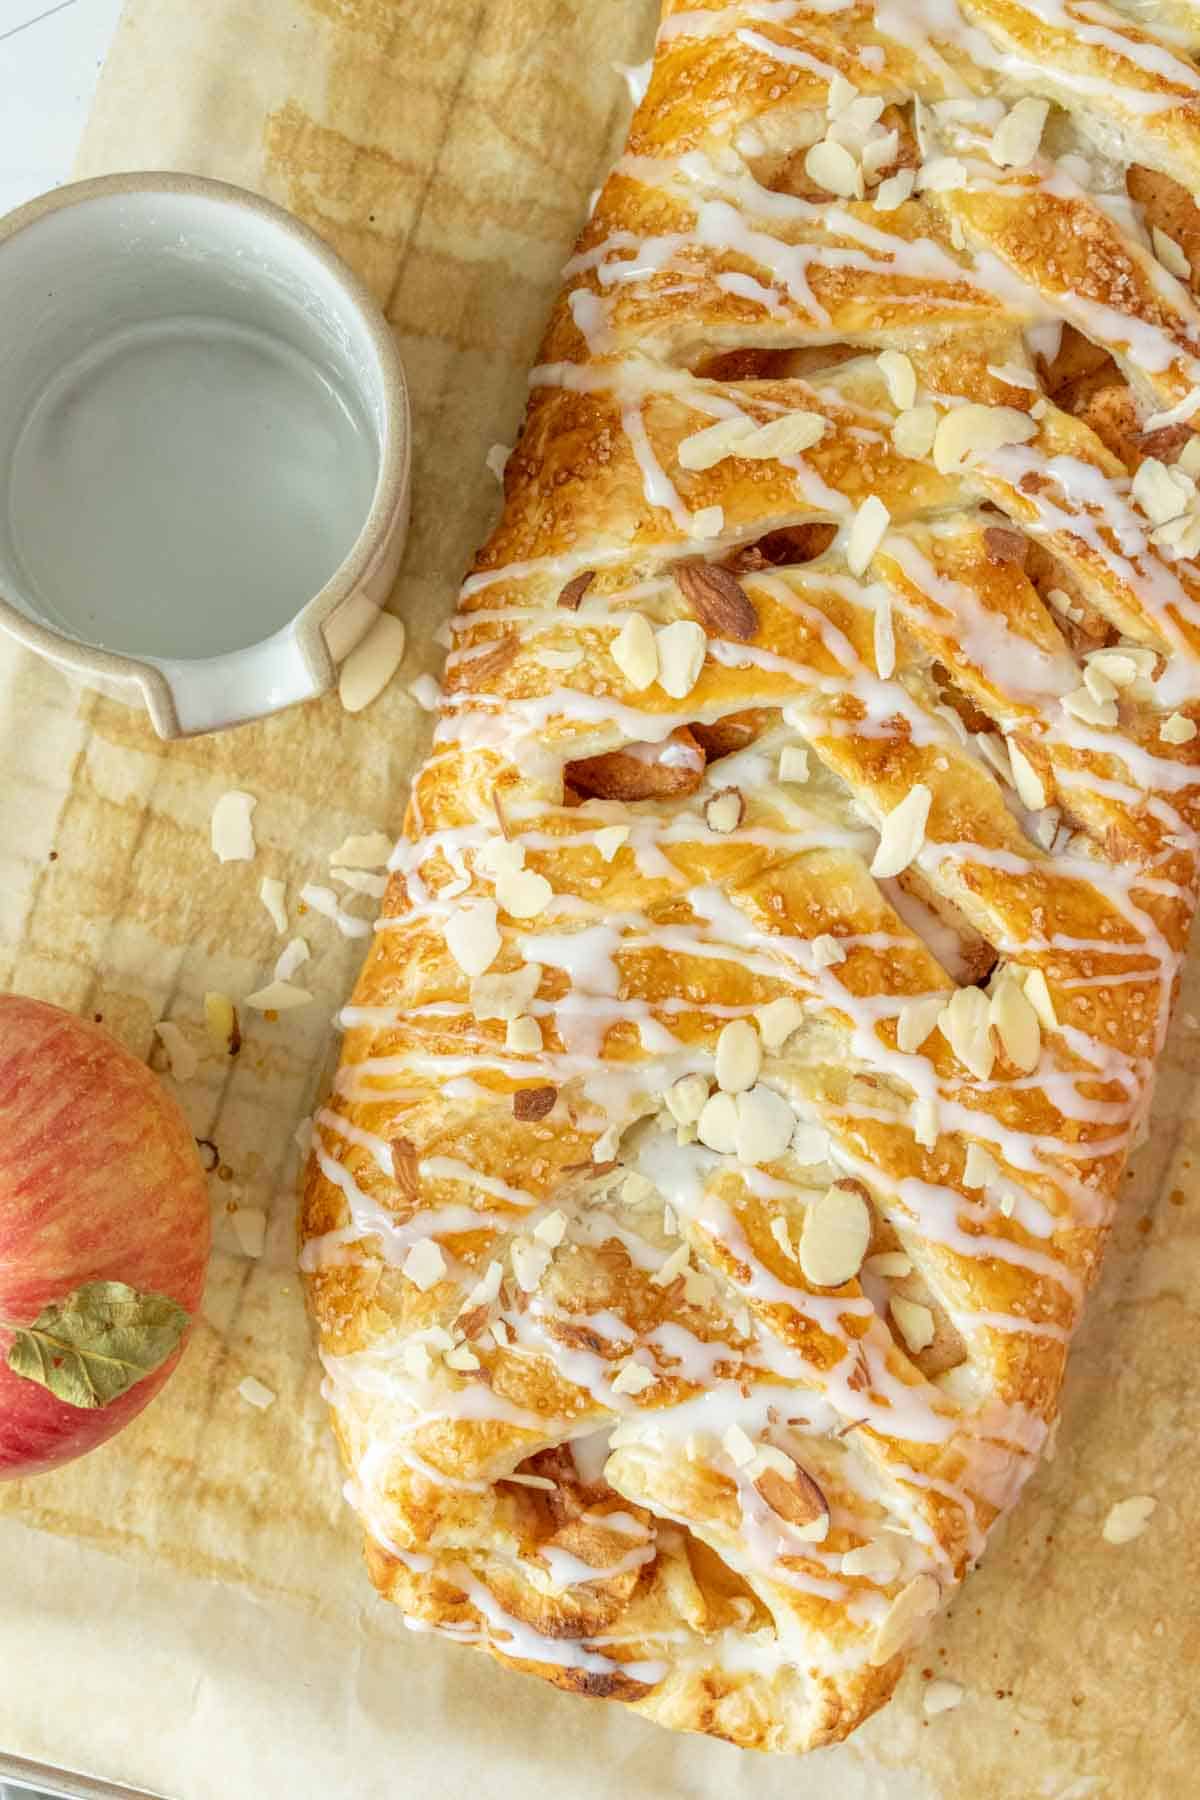 A braided apple pastry on a baking sheet.